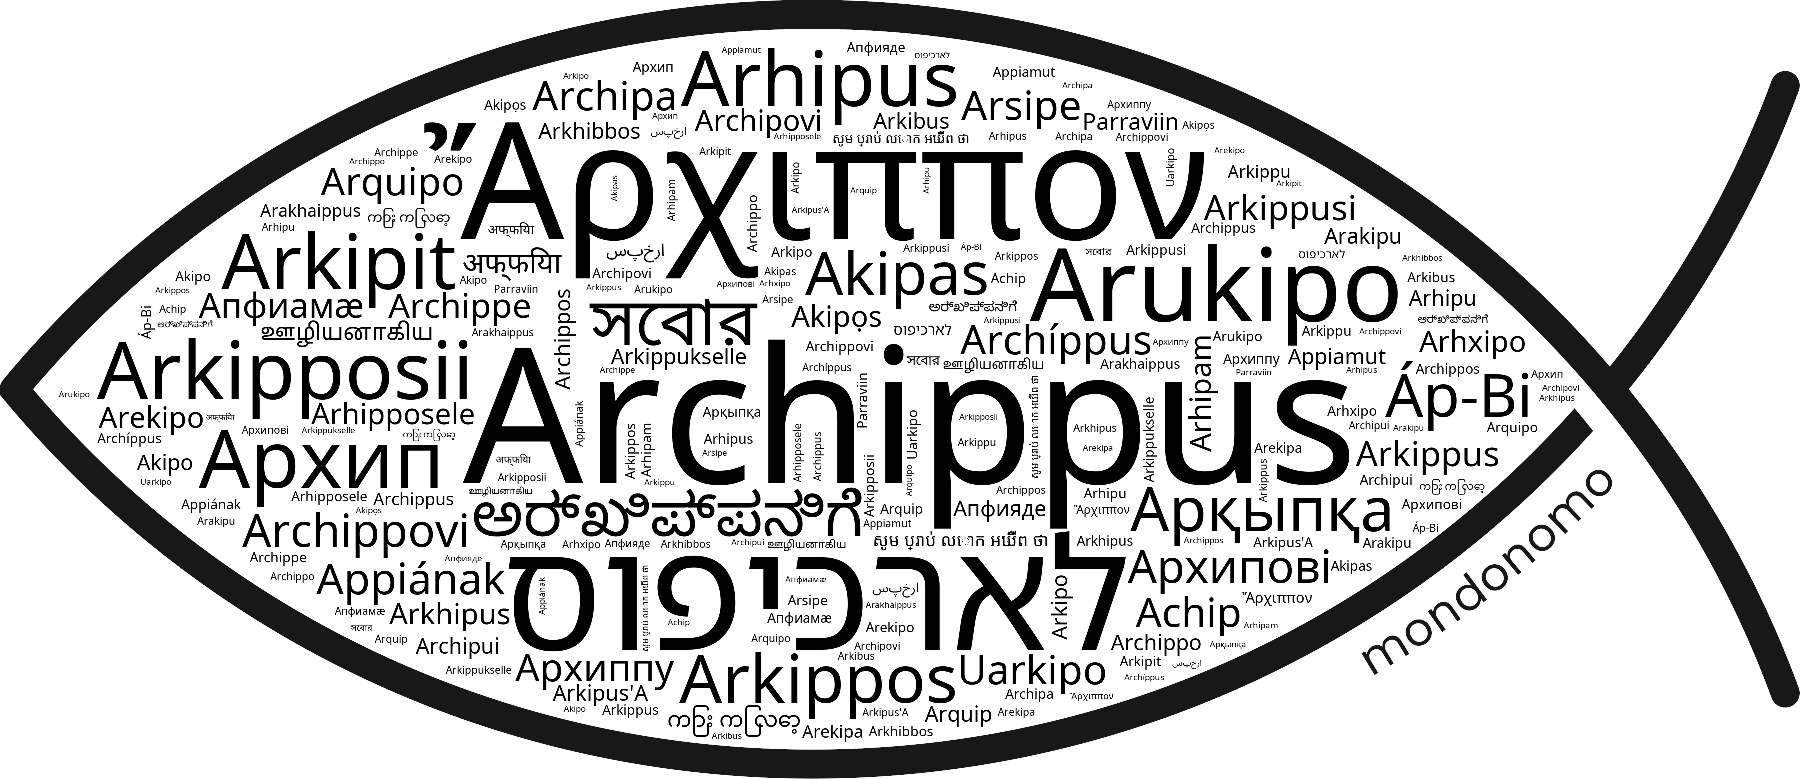 Name Archippus in the world's Bibles